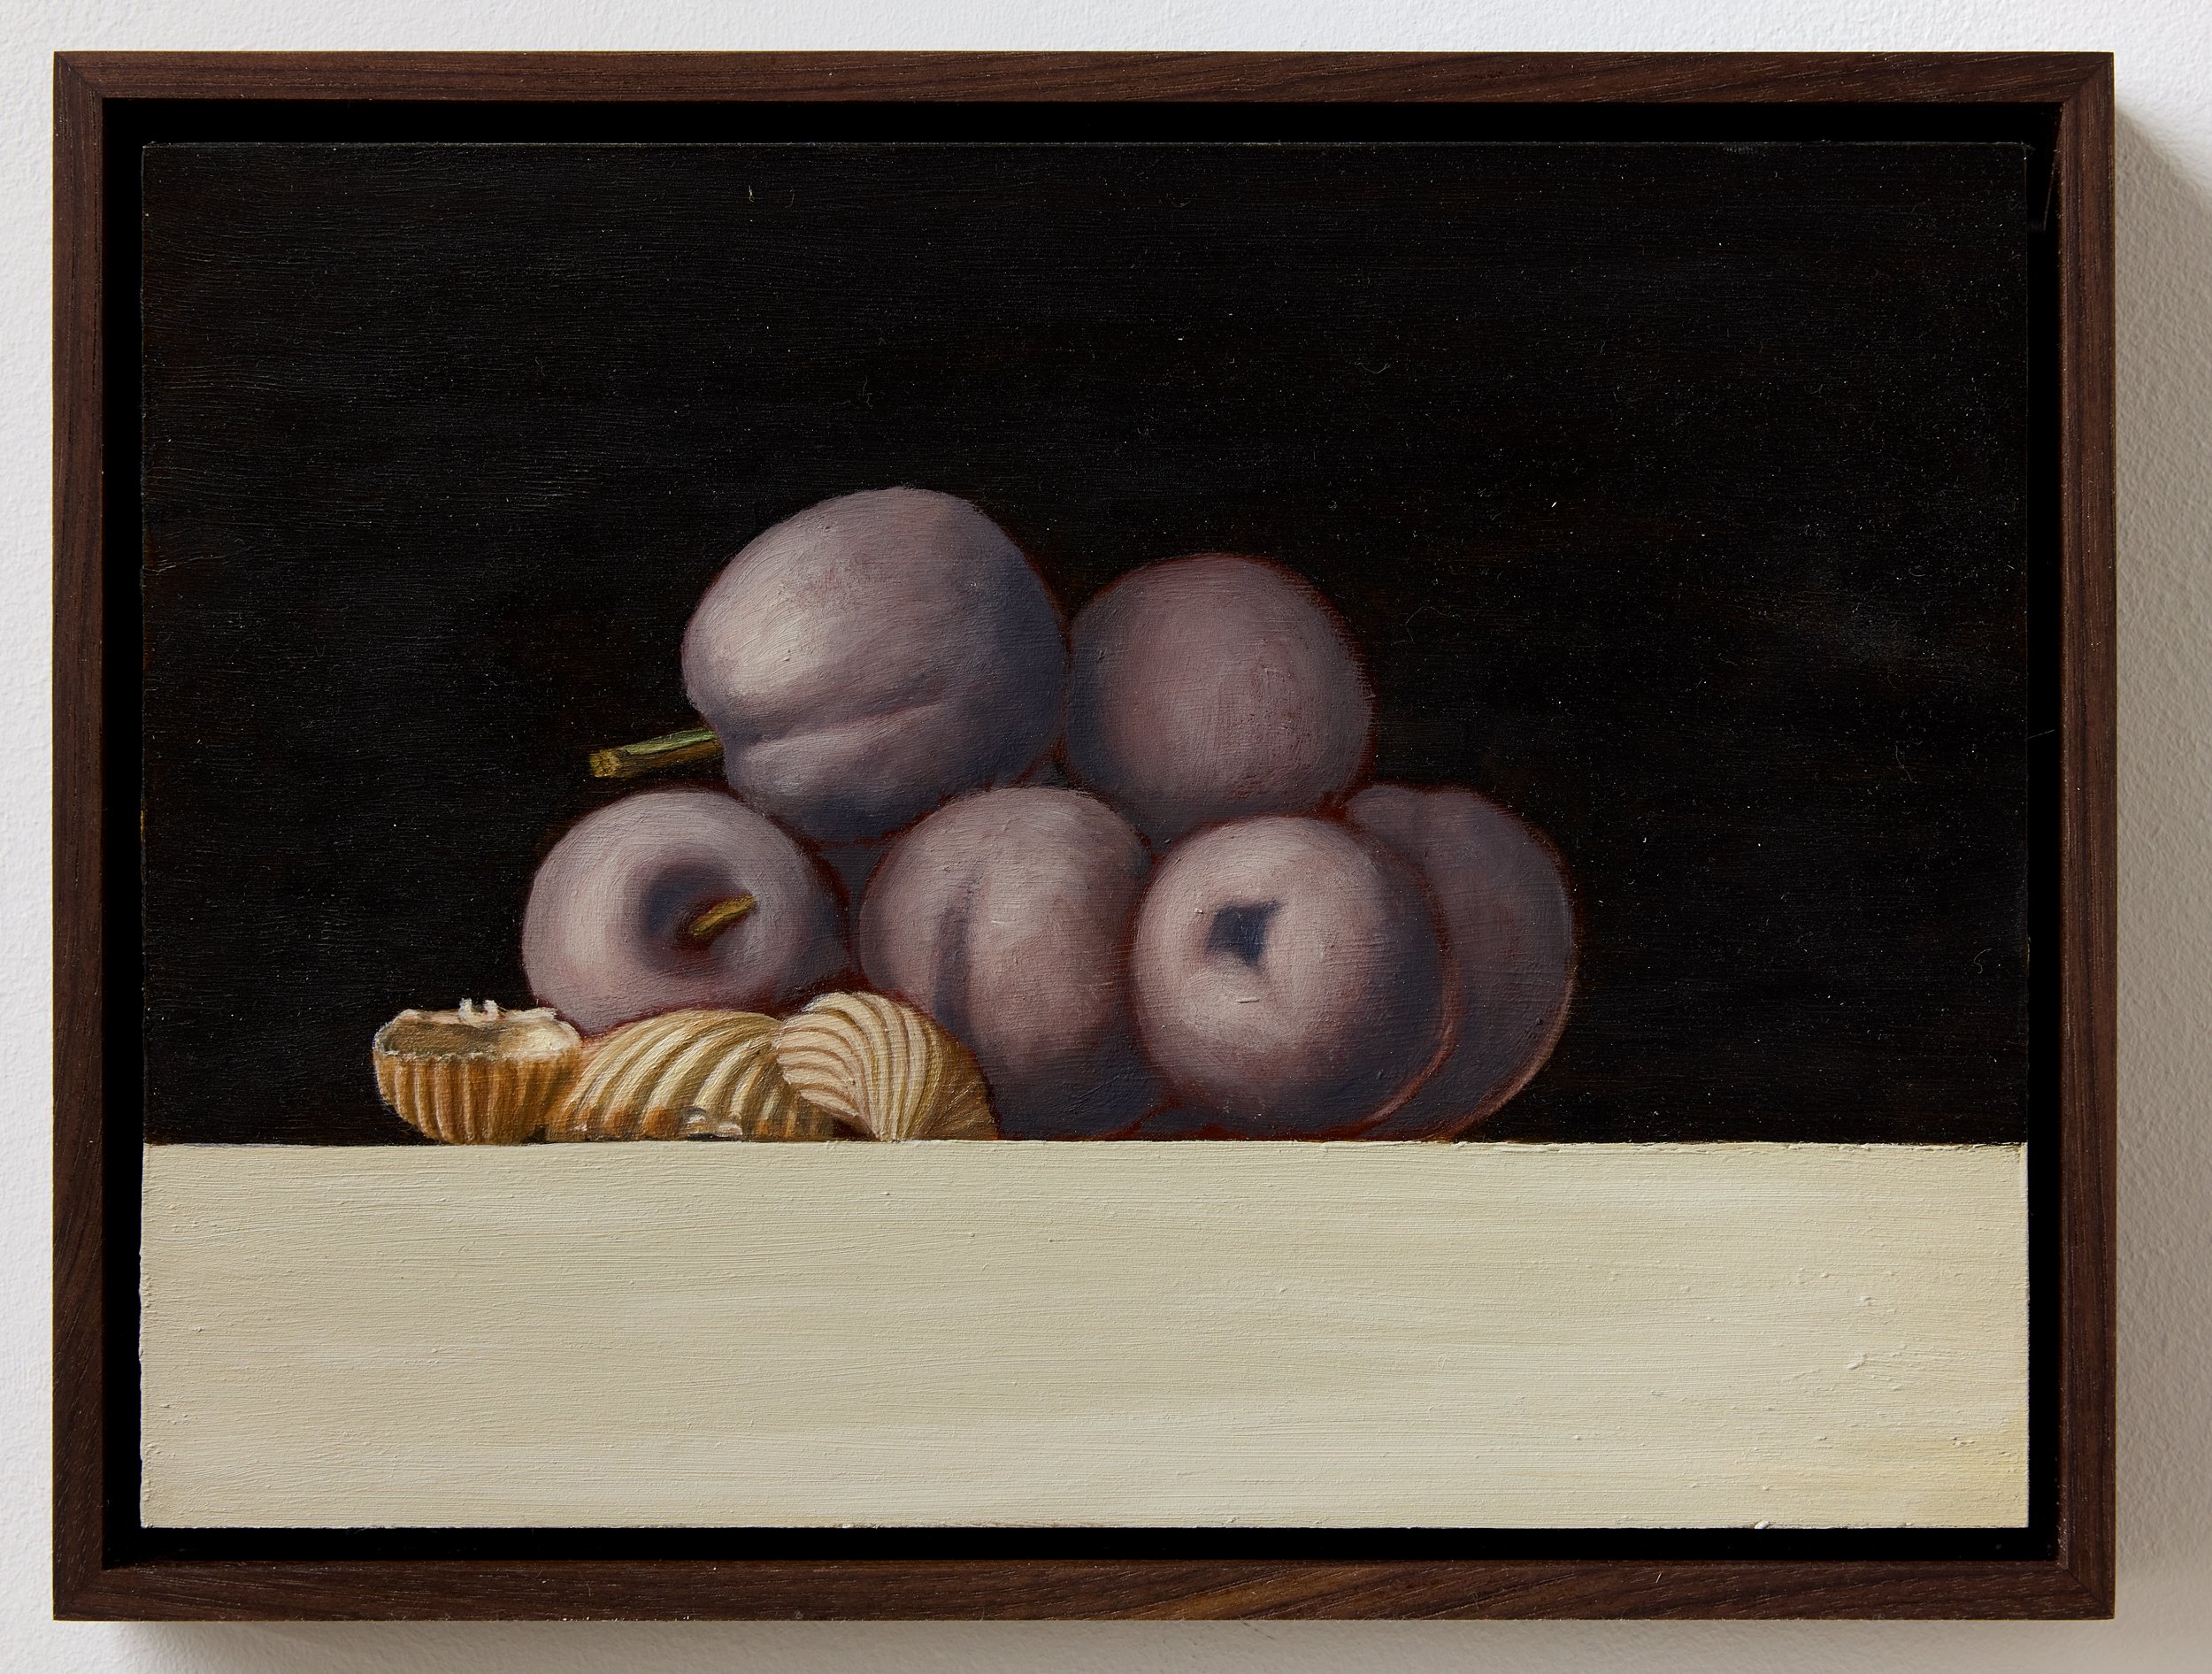 Plums and Lido Beach Shells, 2022. Oil on copper panel. 7 3/8 x 10"